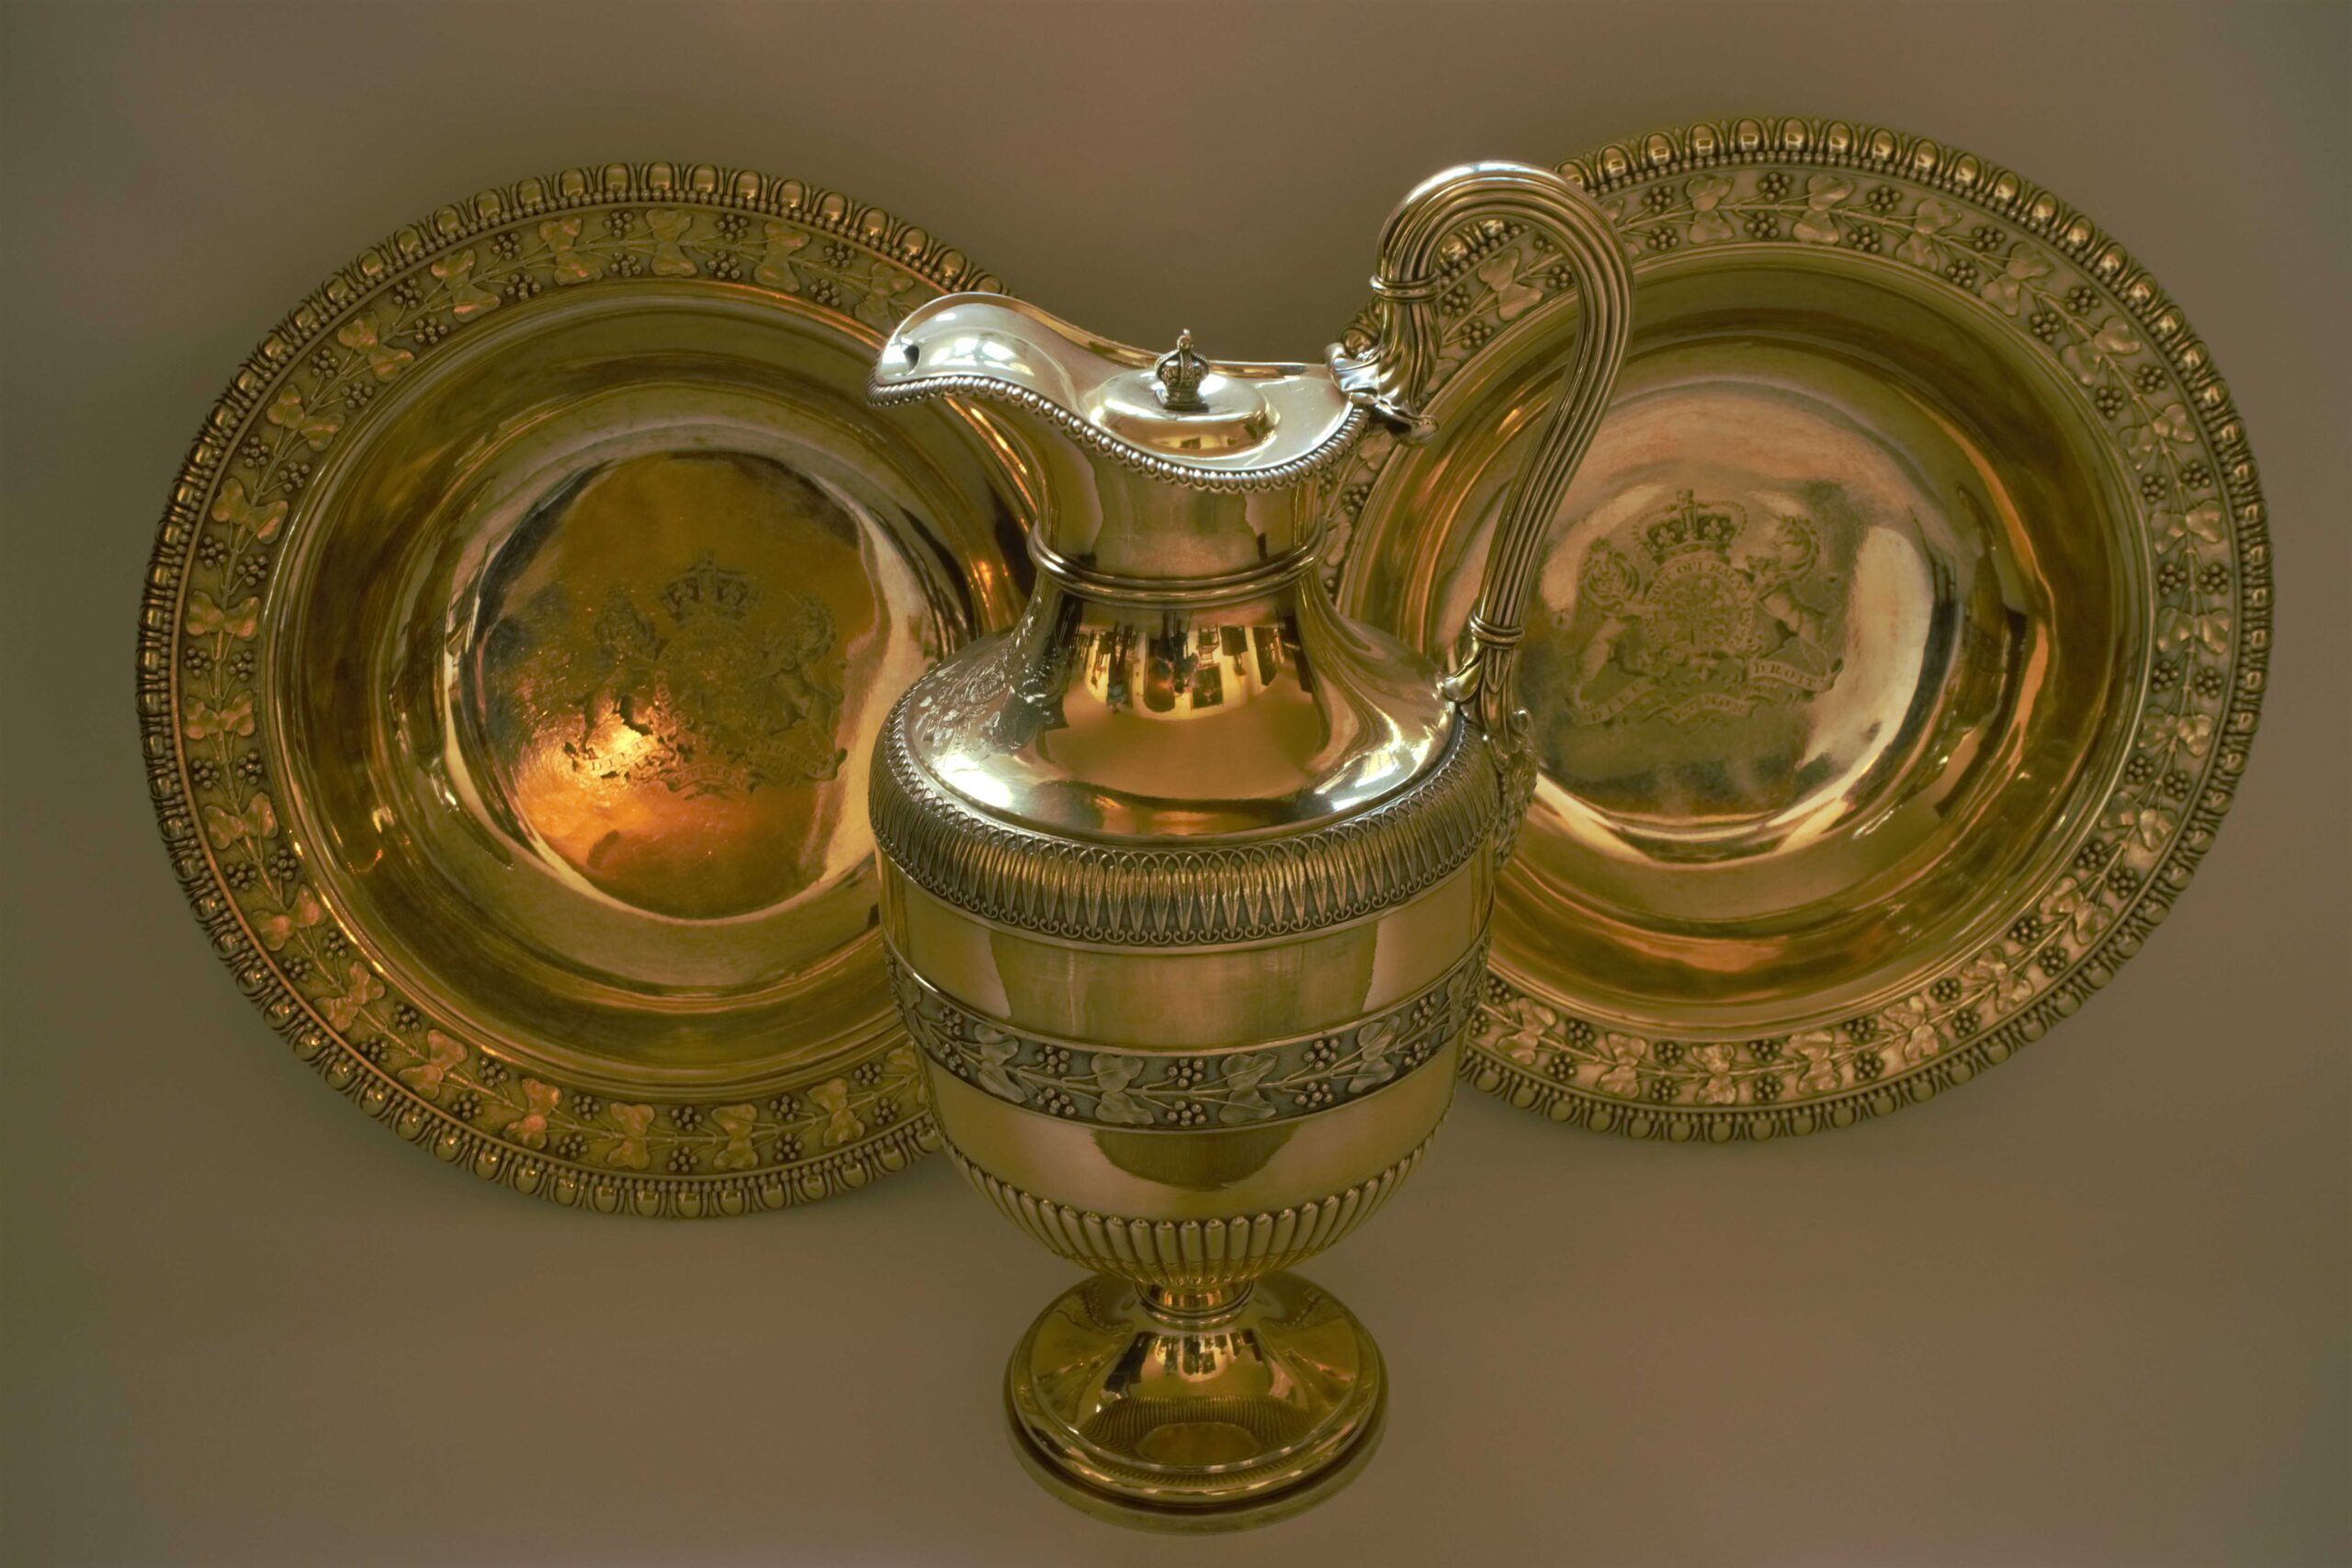 Items of coronation plate dating from 1603 to 1821 will be on display